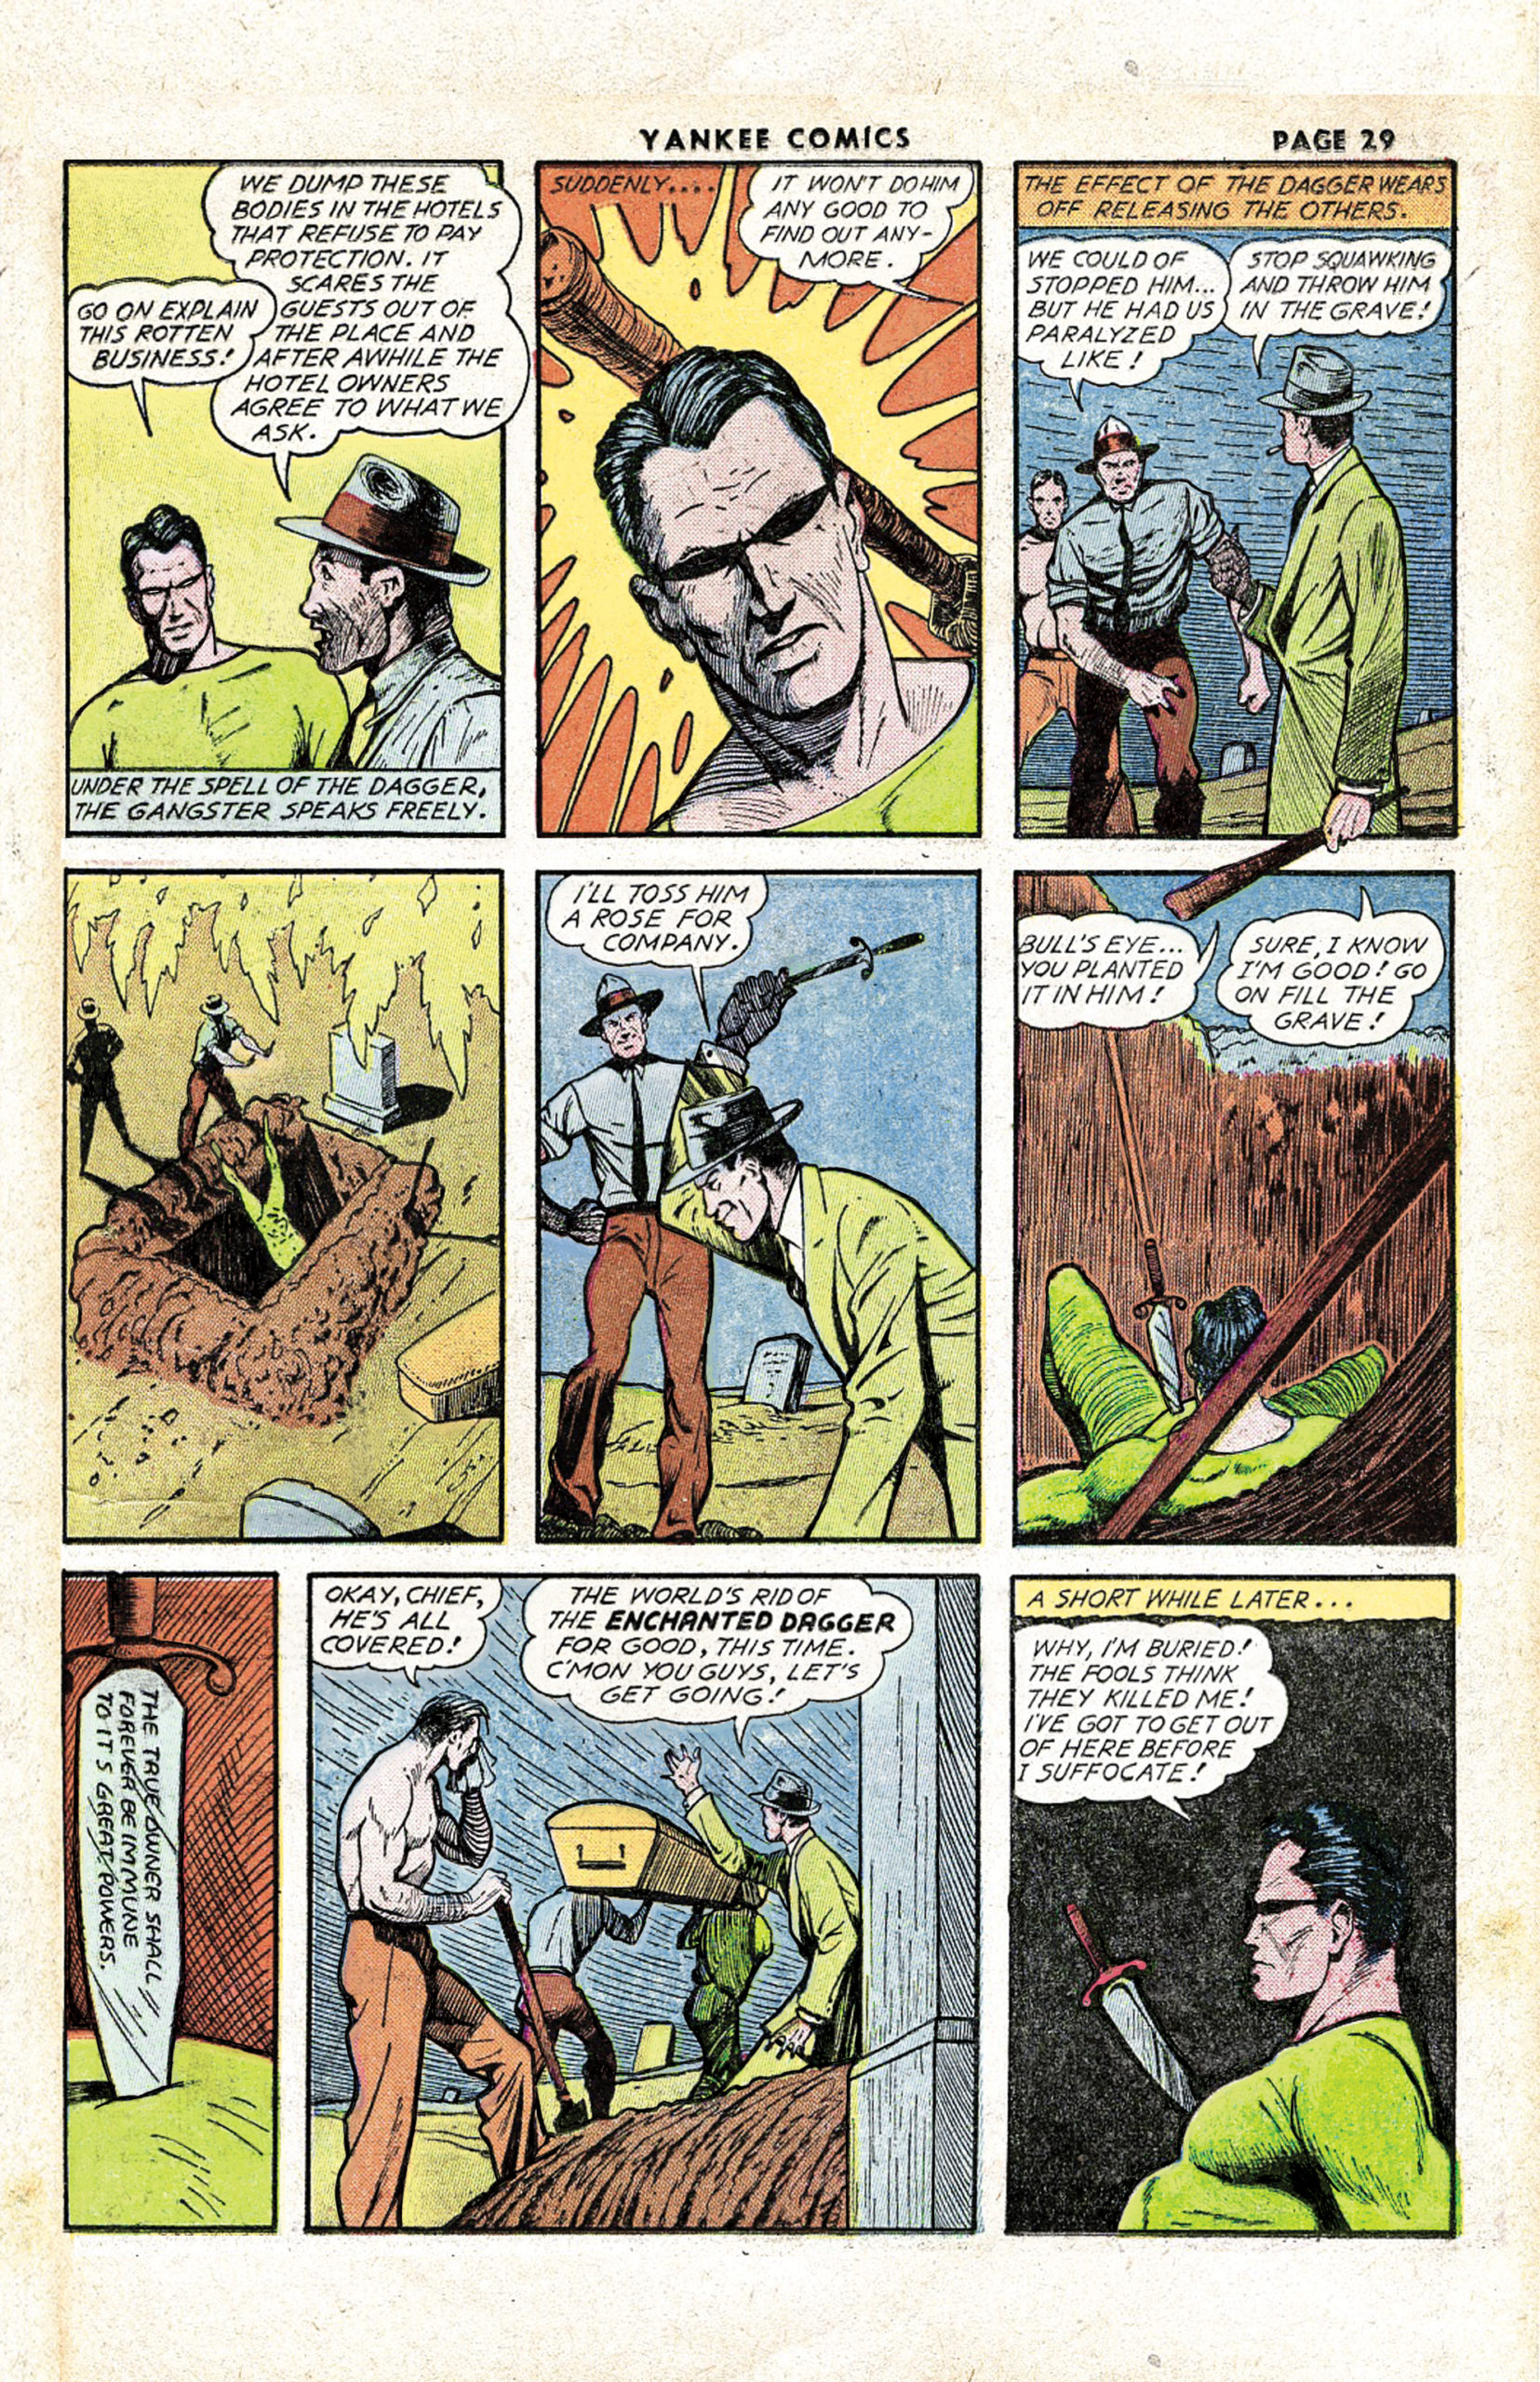 The Enchanted Dagger #5 – Page 20 (Classic EDag #3)